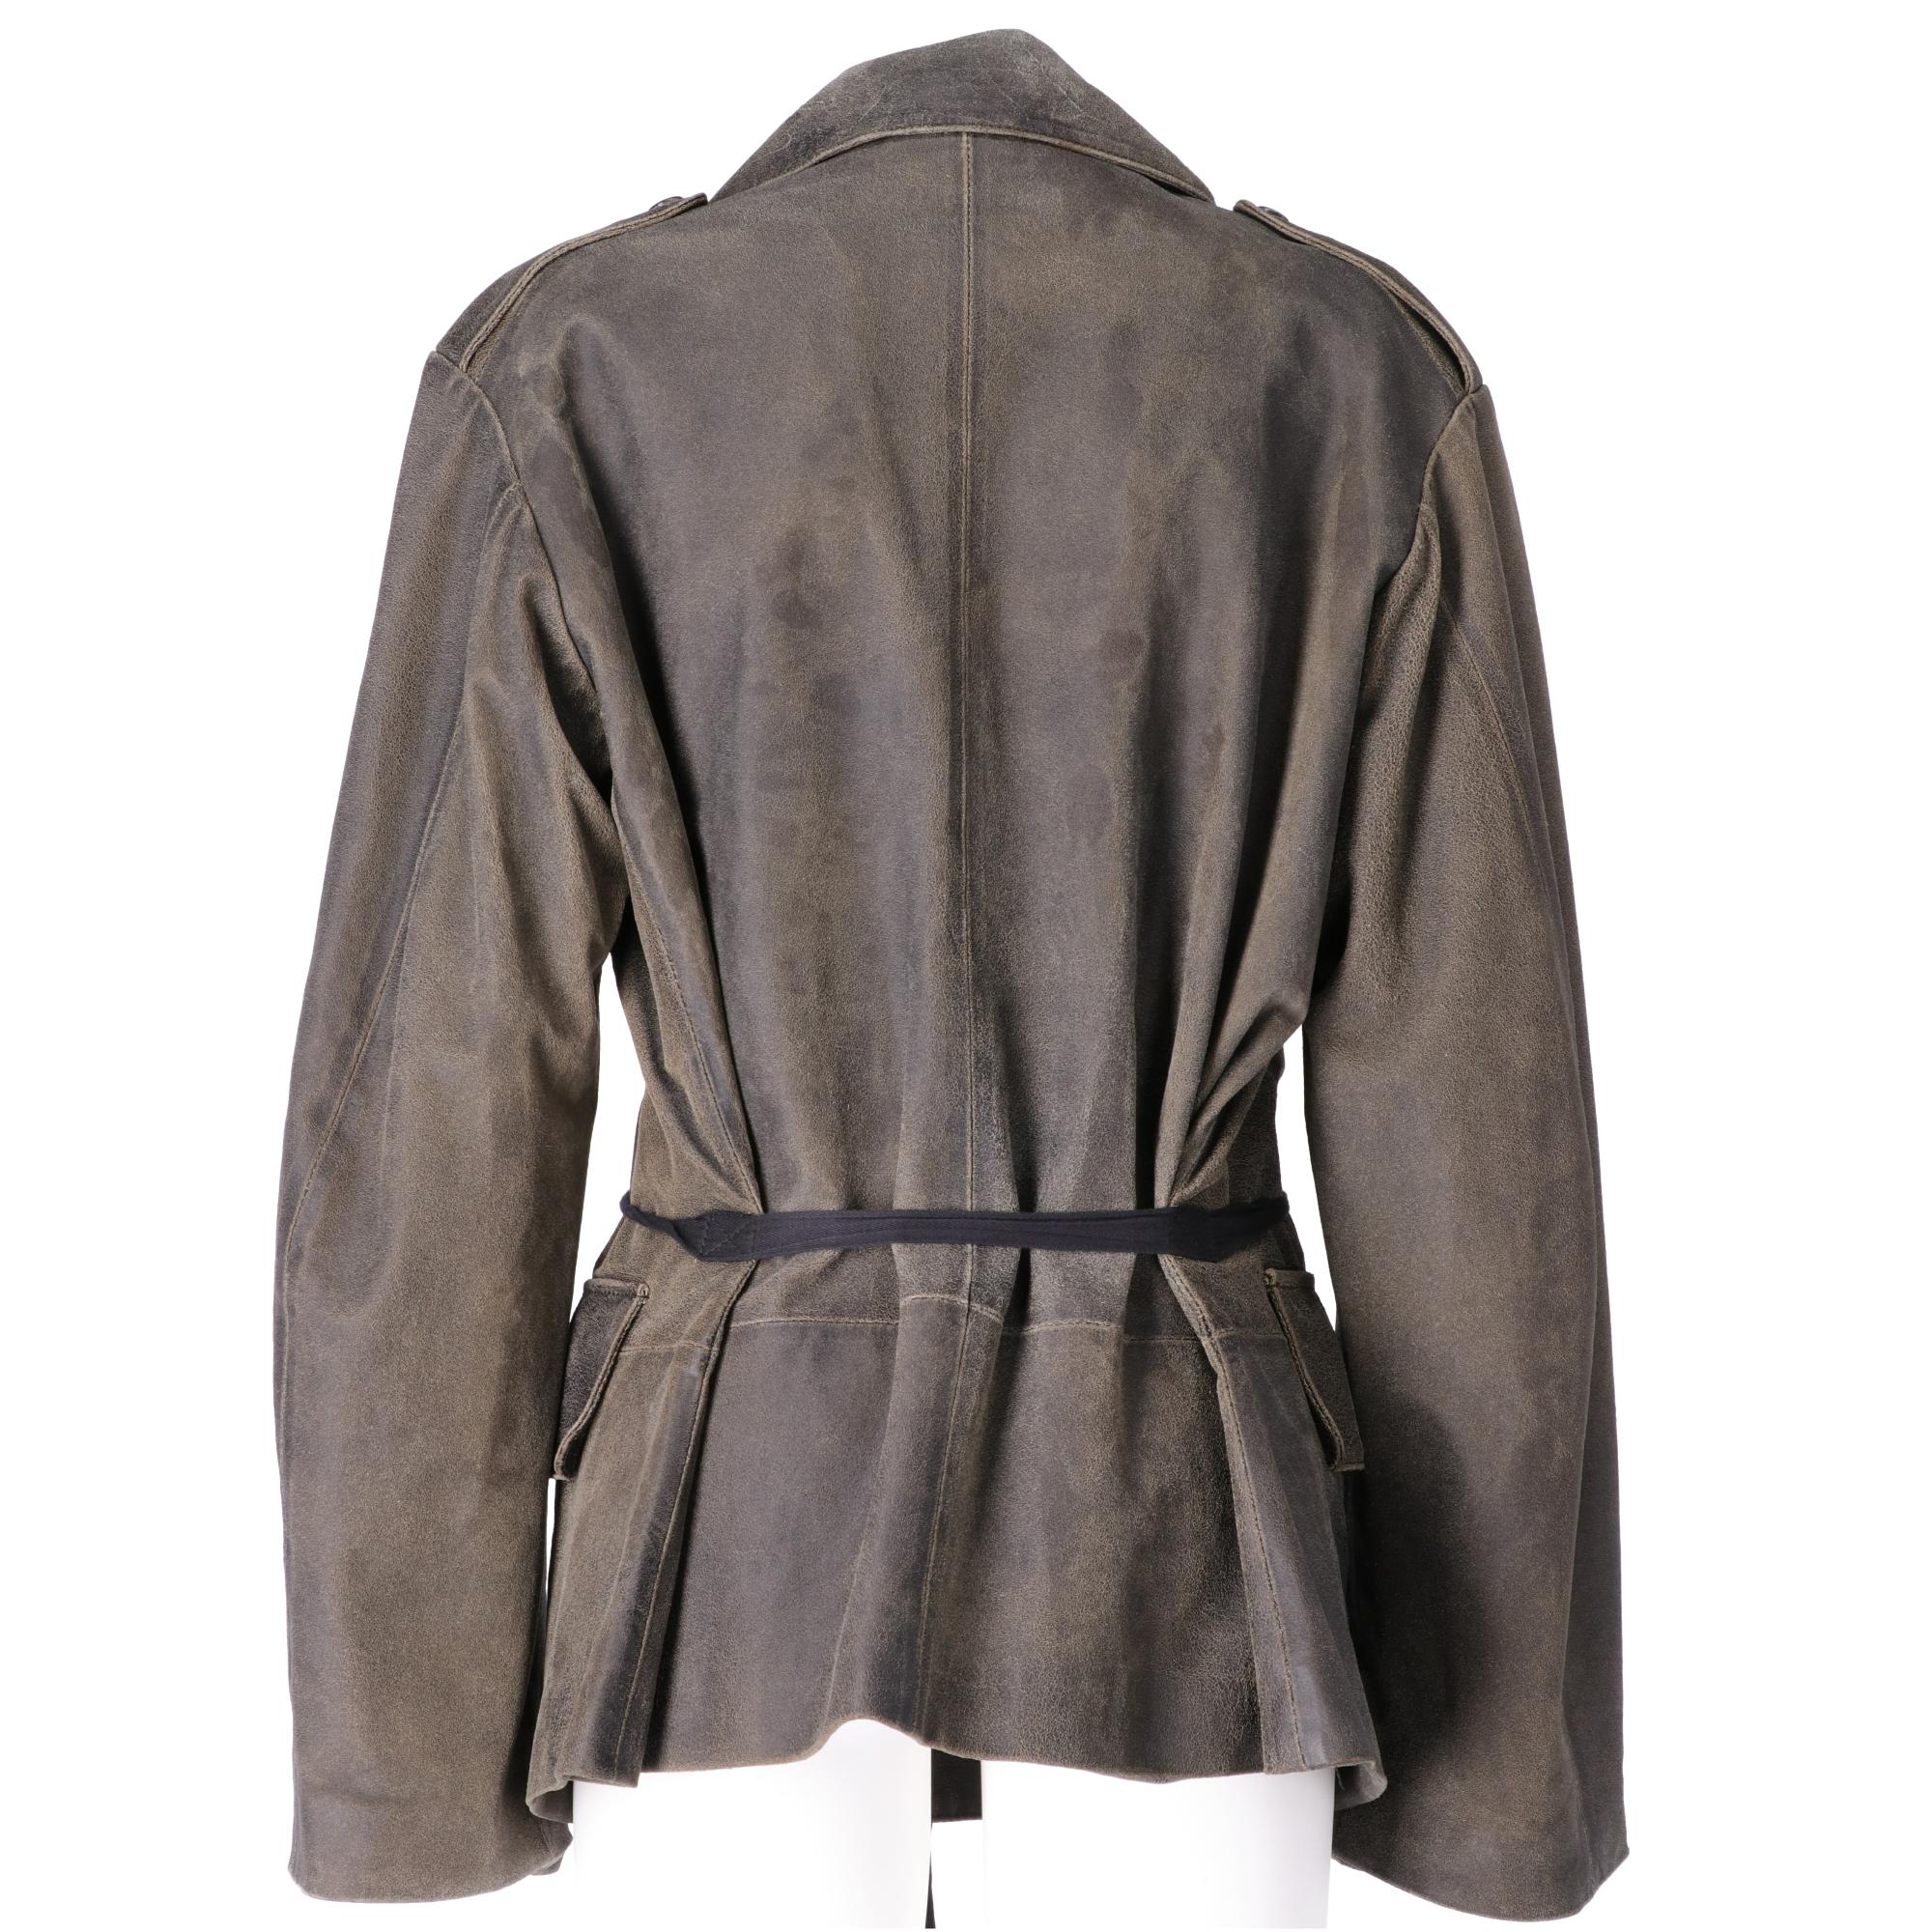 Ann Demeulemeester jacket, in leather subjected to an aging treatment, gray color, with classic lapels collar, shoulder straps with buttons, long sleeves, front double-breasted closure with black buttons, welt pockets with flap and button and cotton